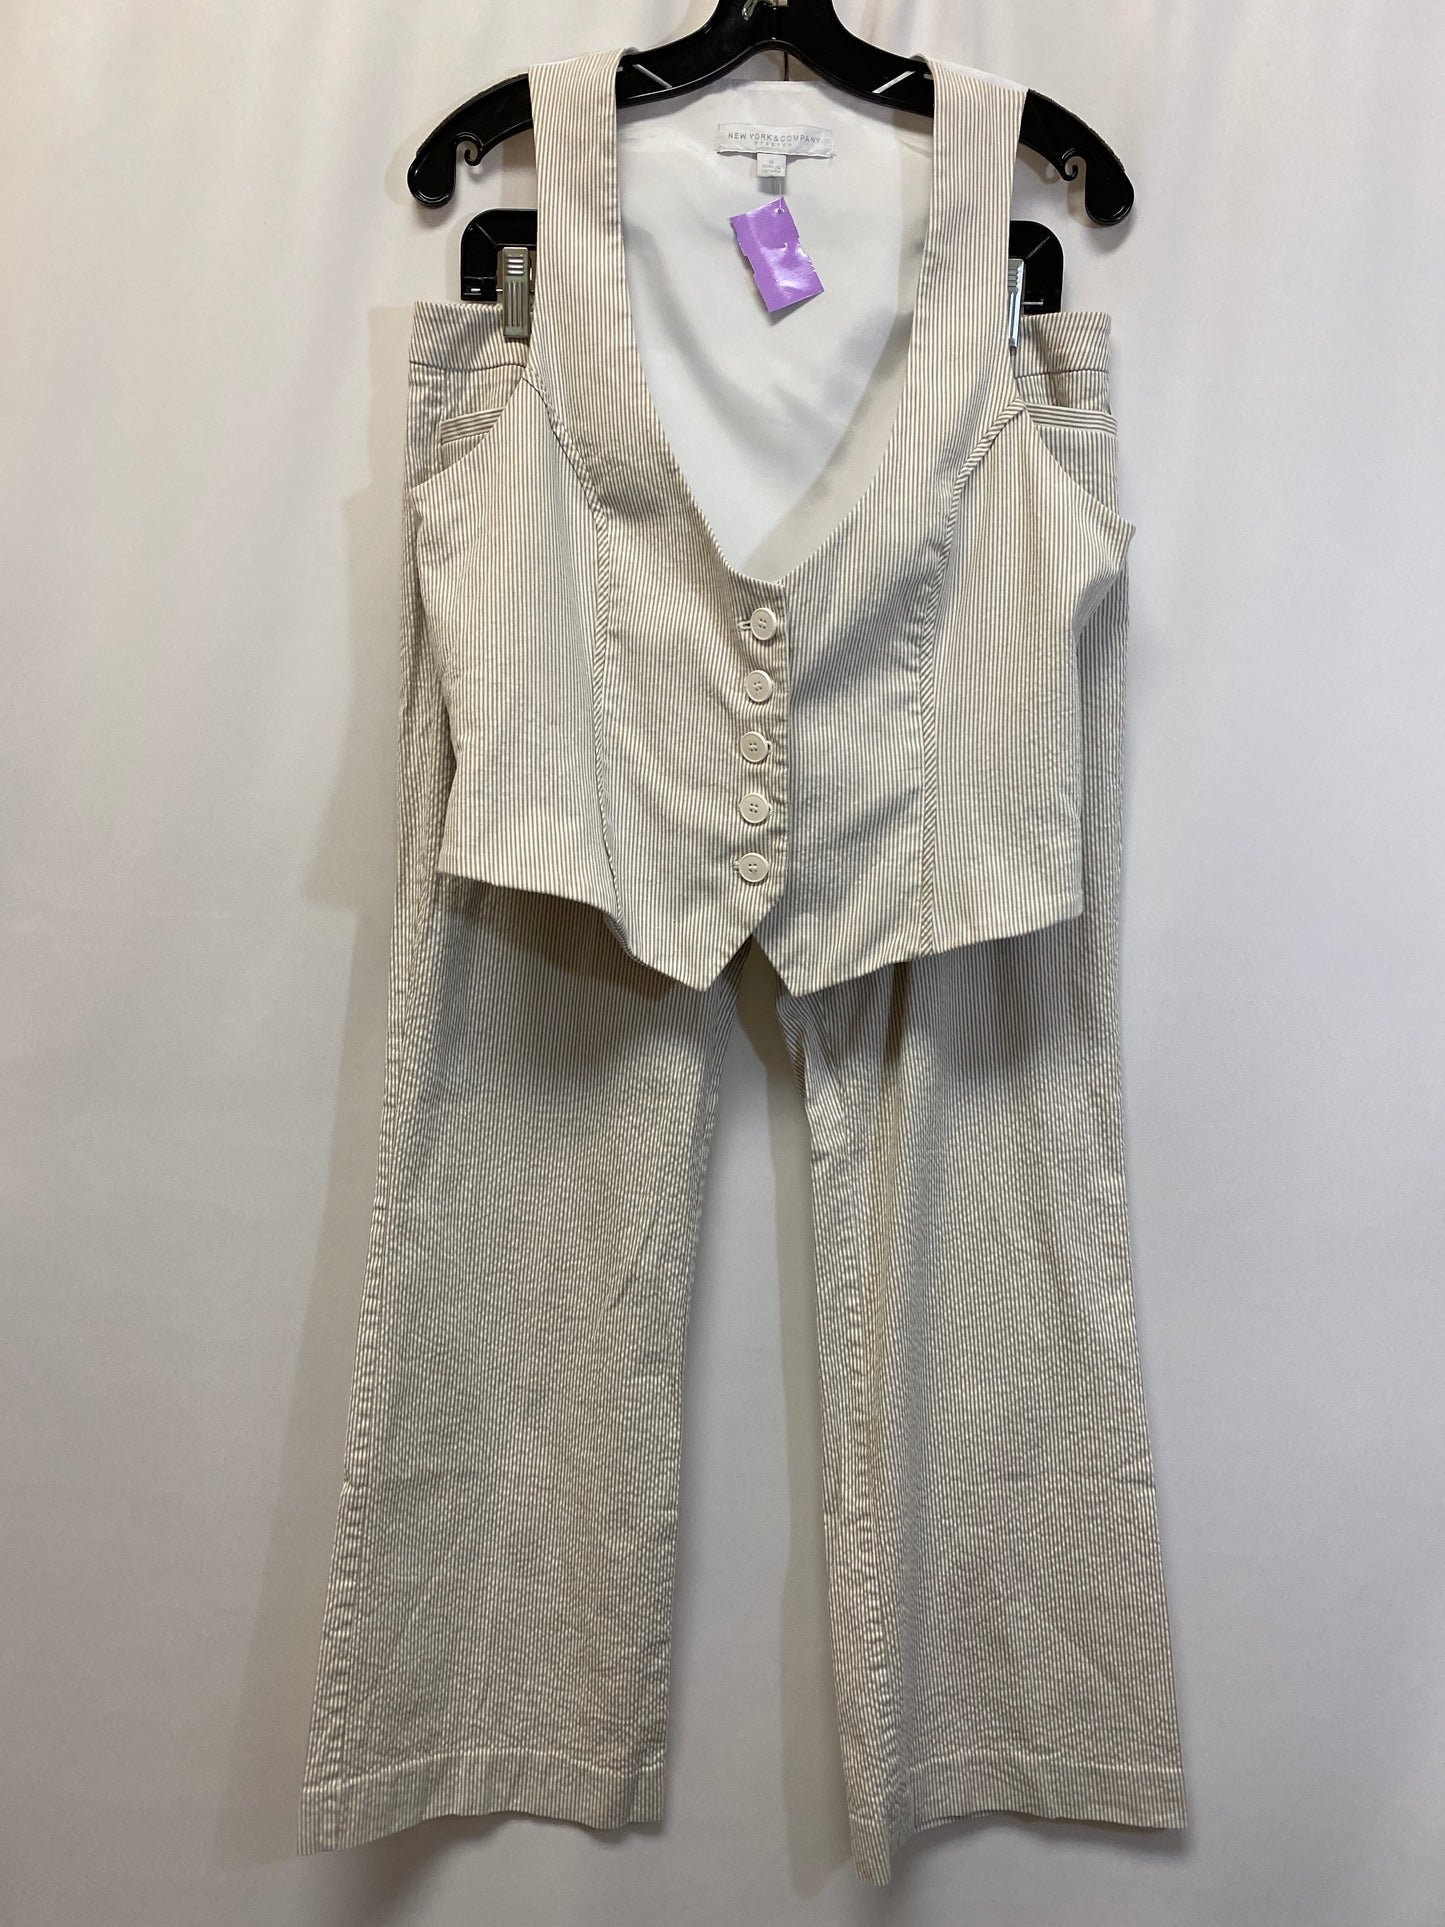 Tan Pants Suit 2pc New York And Co, Size 12